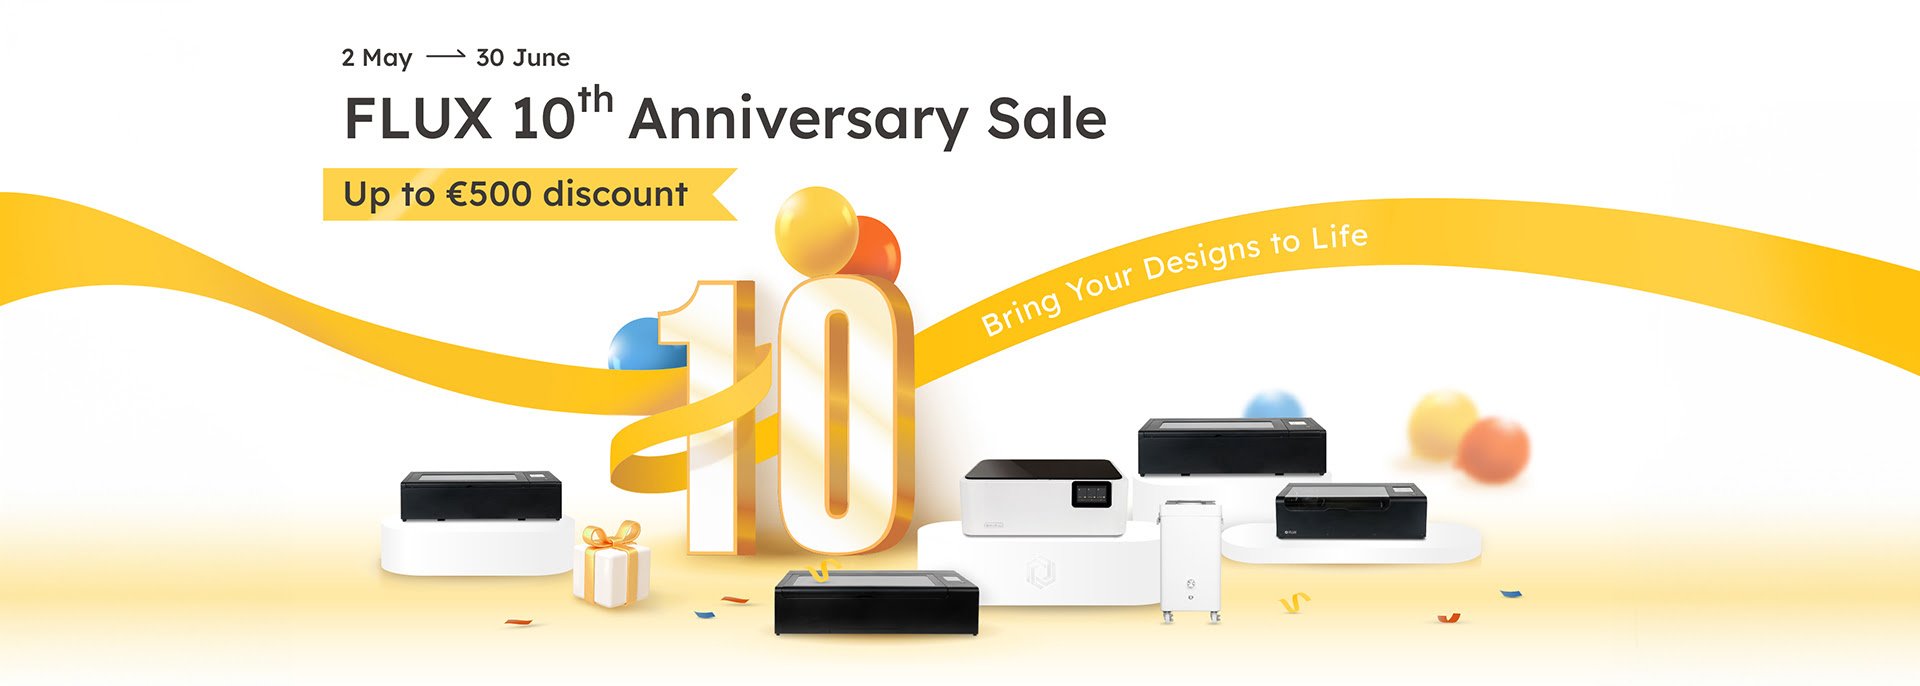 From May 2nd until June 30th it is FLUX 10th Anniversary Sale with up to €500 discount